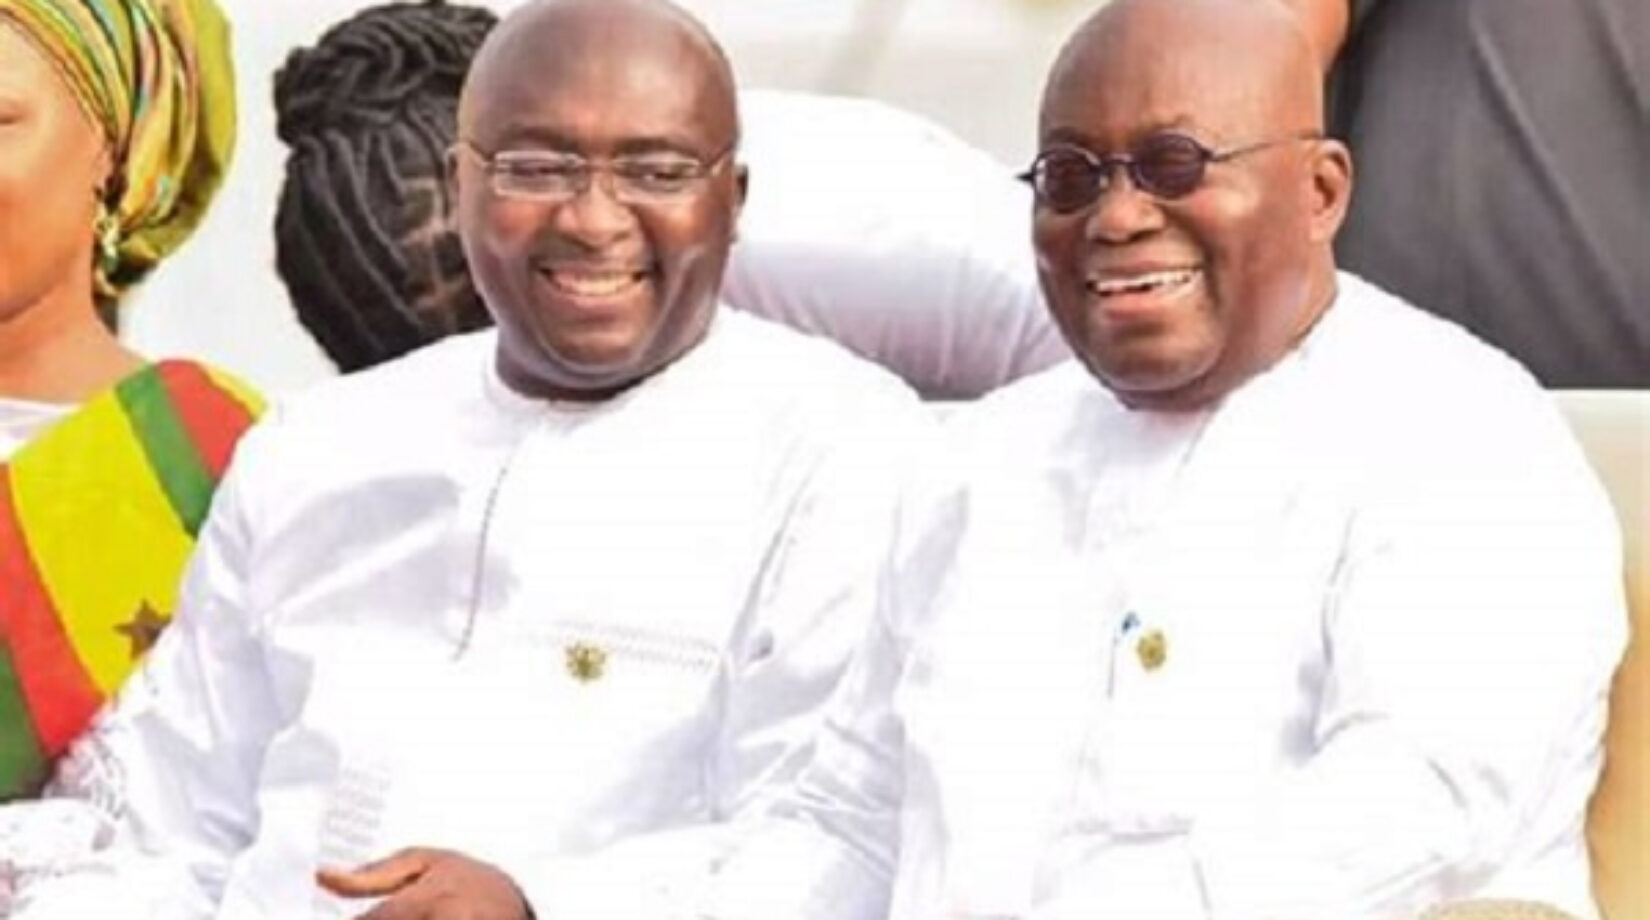 Pres.Akufo-Addo reveals:I chose Bawumia as my running mate due to his honesty and cleverness